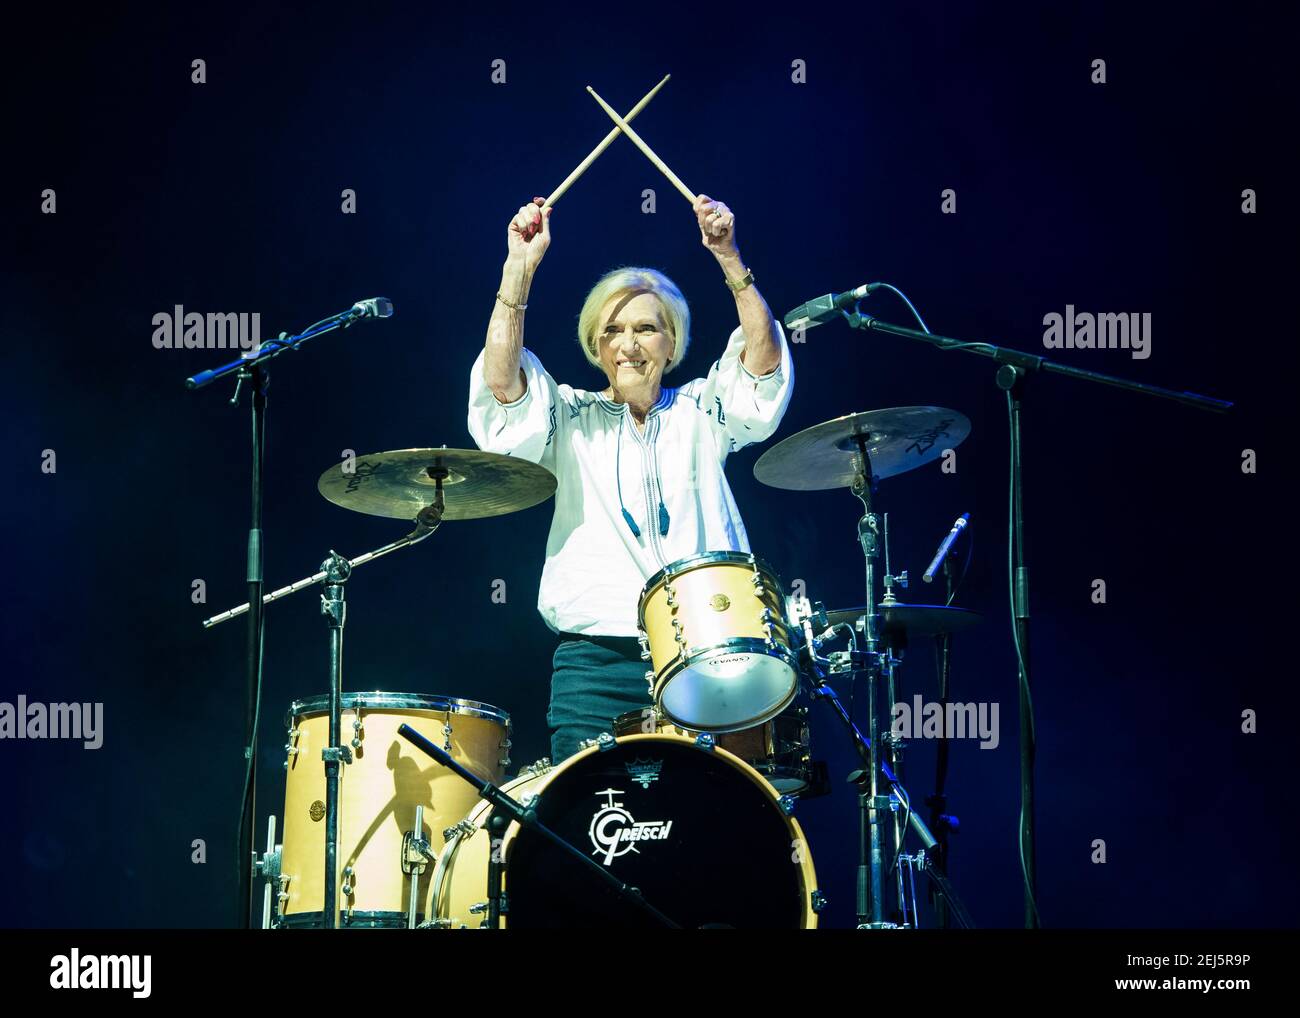 Mary Berry plays the drums on stage with Rick Astley at Camp Bestival 2018, Lulworth Castle, Wareham. Picture date: Friday 27th July 2018. Photo credit should read: David Jensent Stock Photo